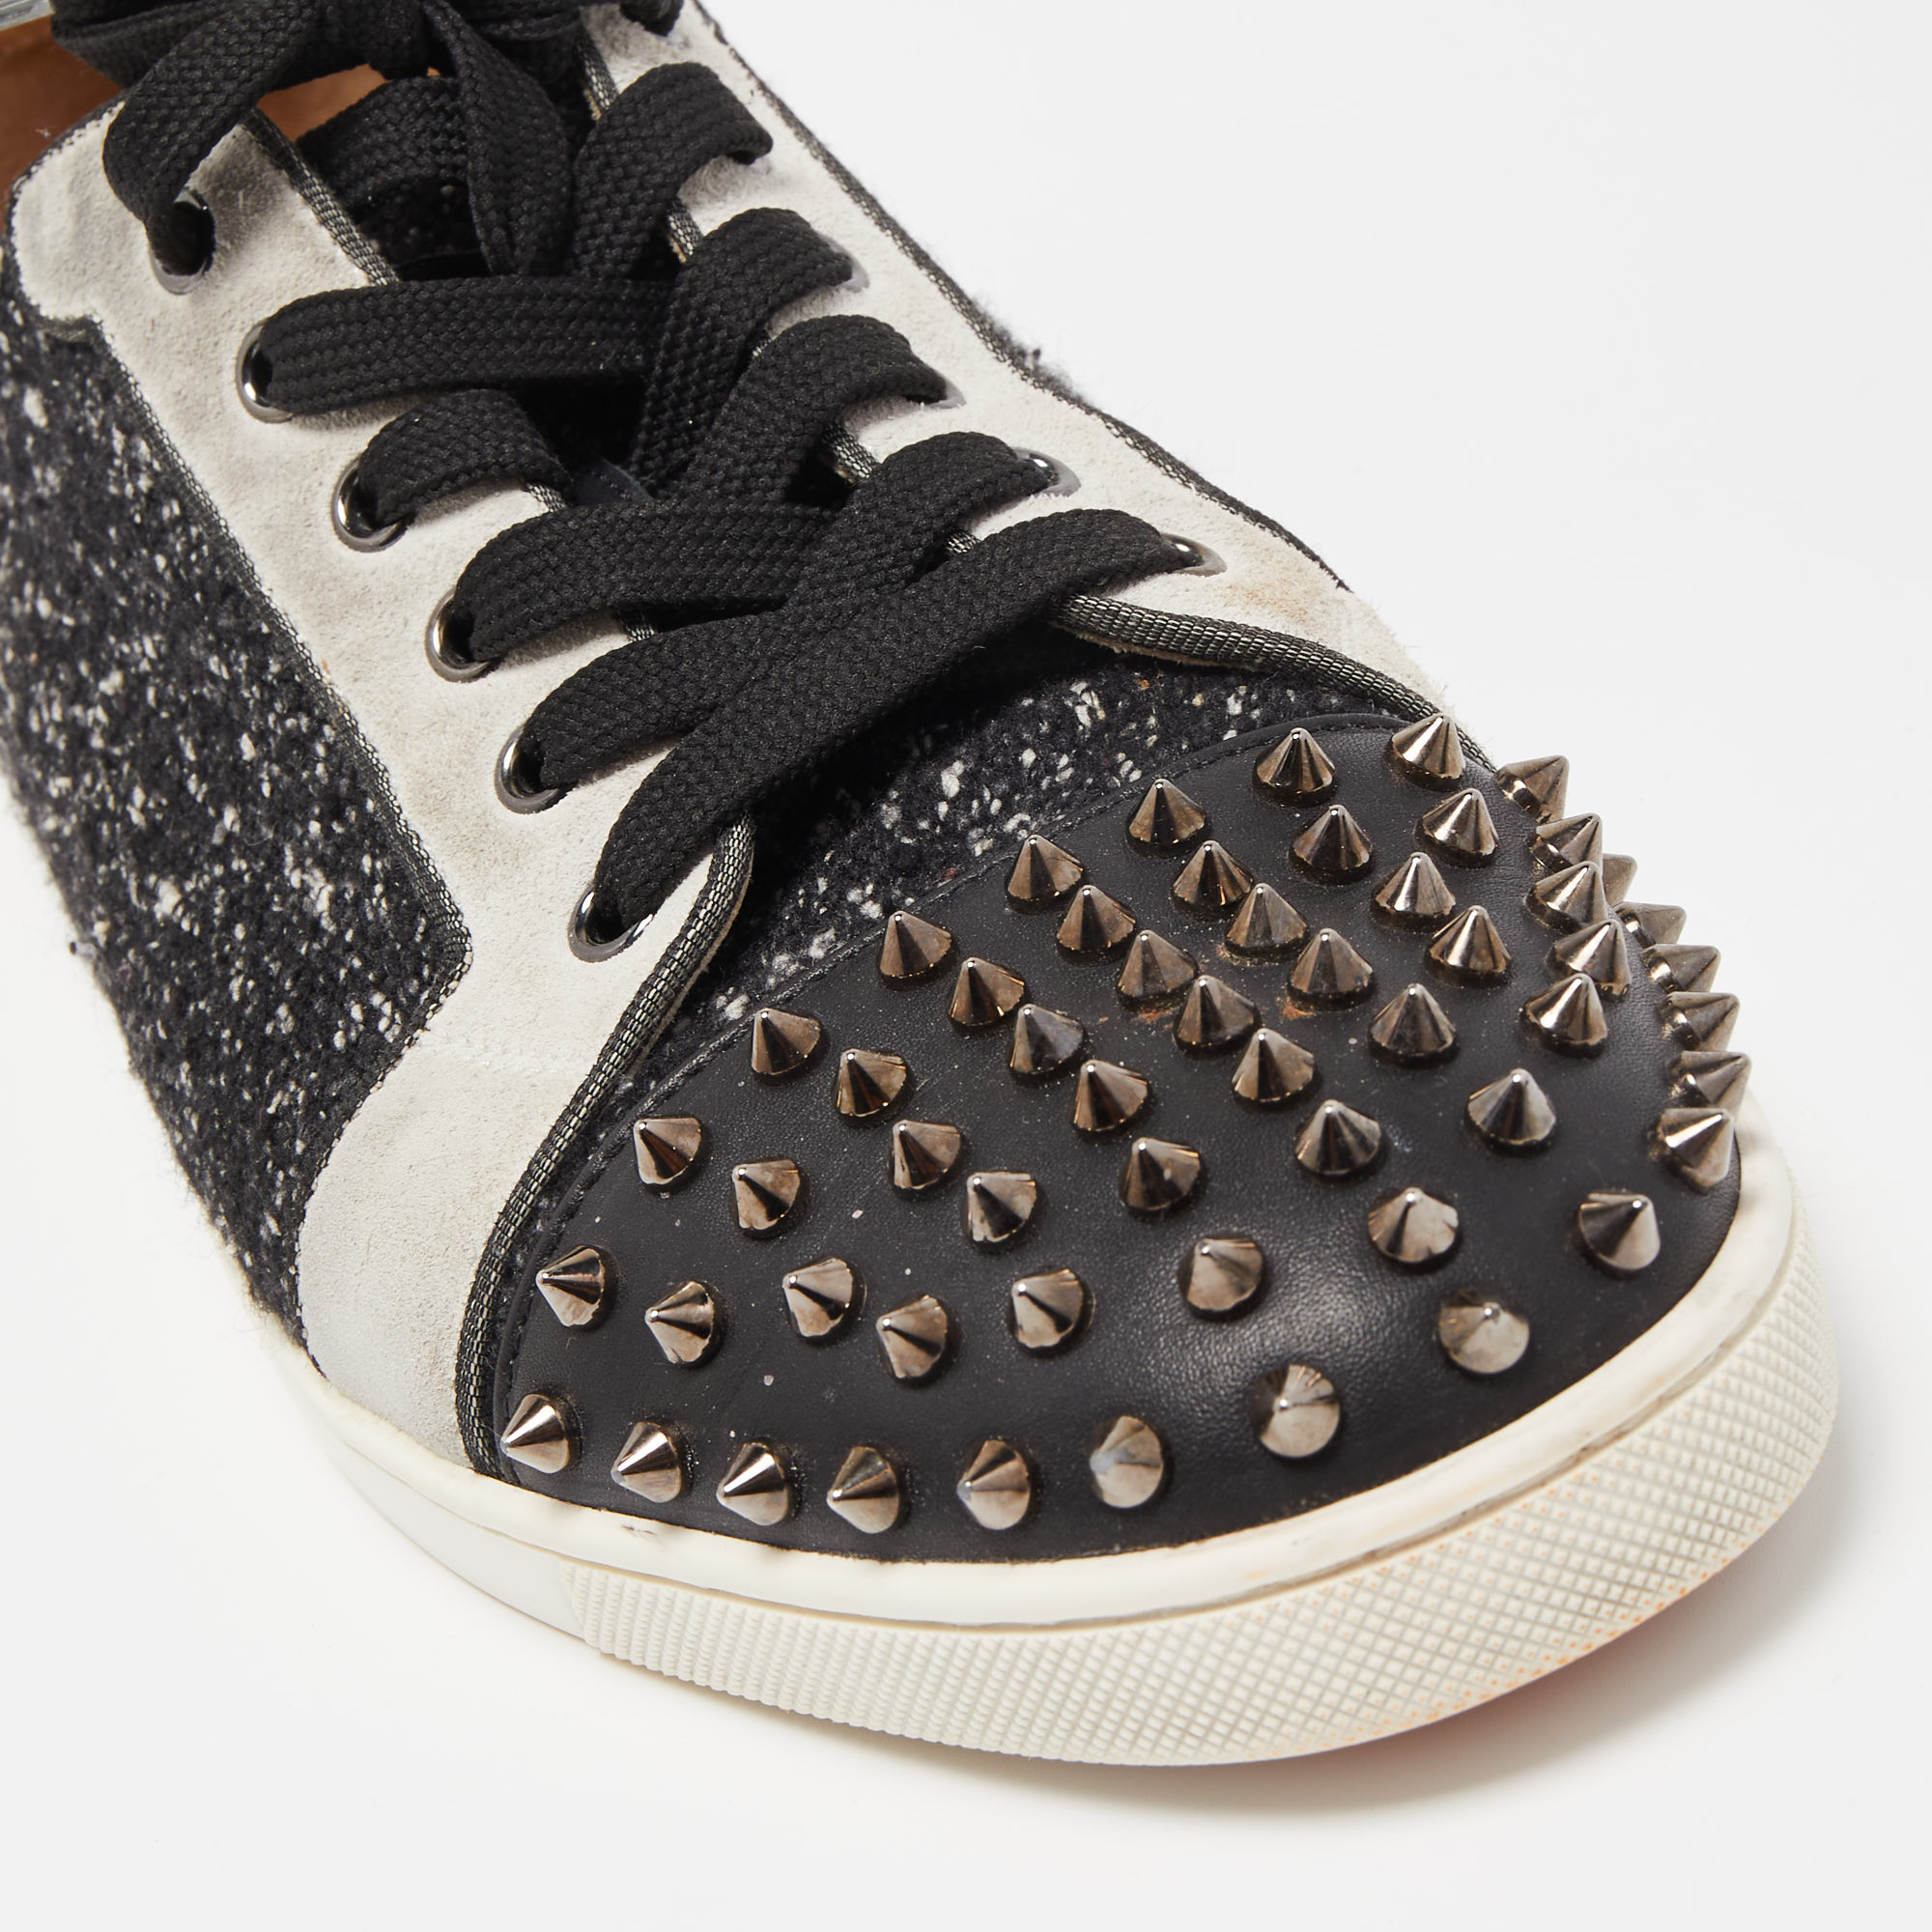 Christian Louboutin Tricolor Leather And Fabric Louis Junior Spikes Low Top Sneakers Size 43.5